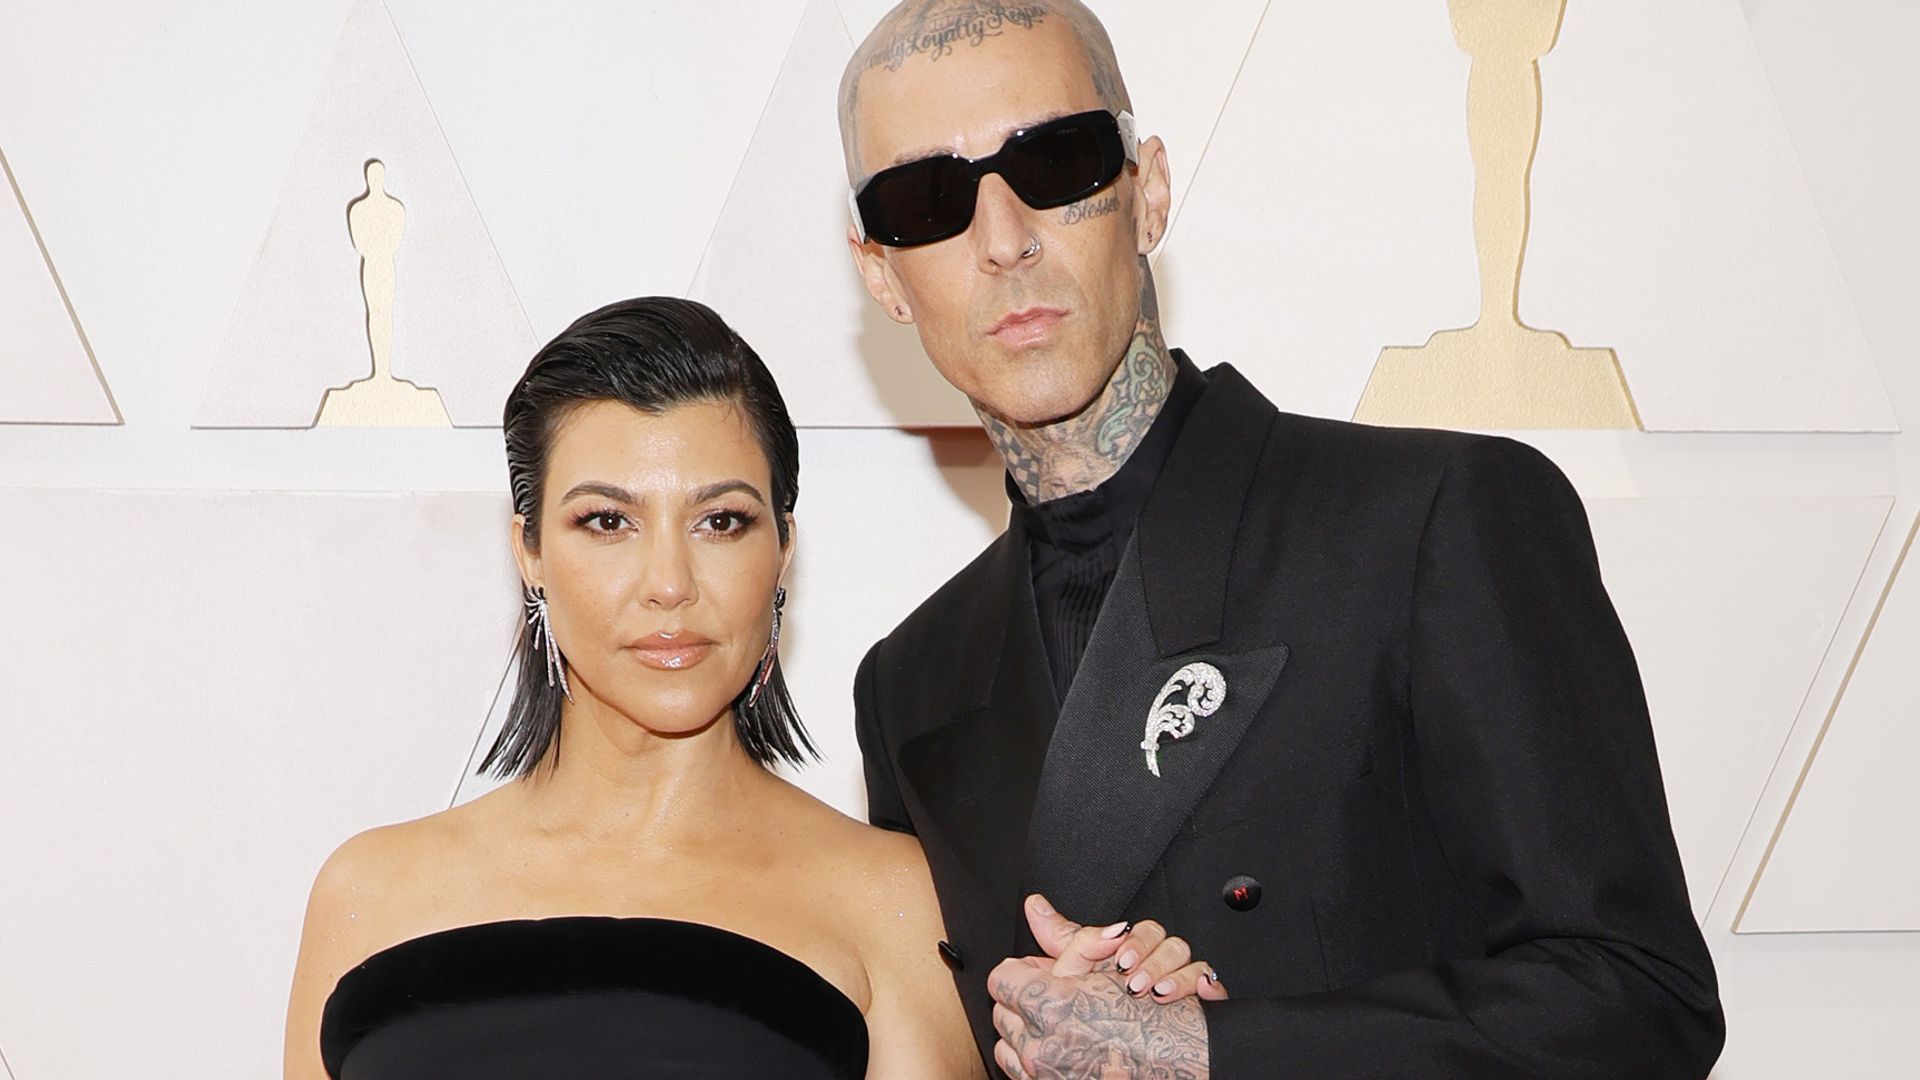 Kourtney Kardashian reveals surprising family news with Travis Barker two years after wedding